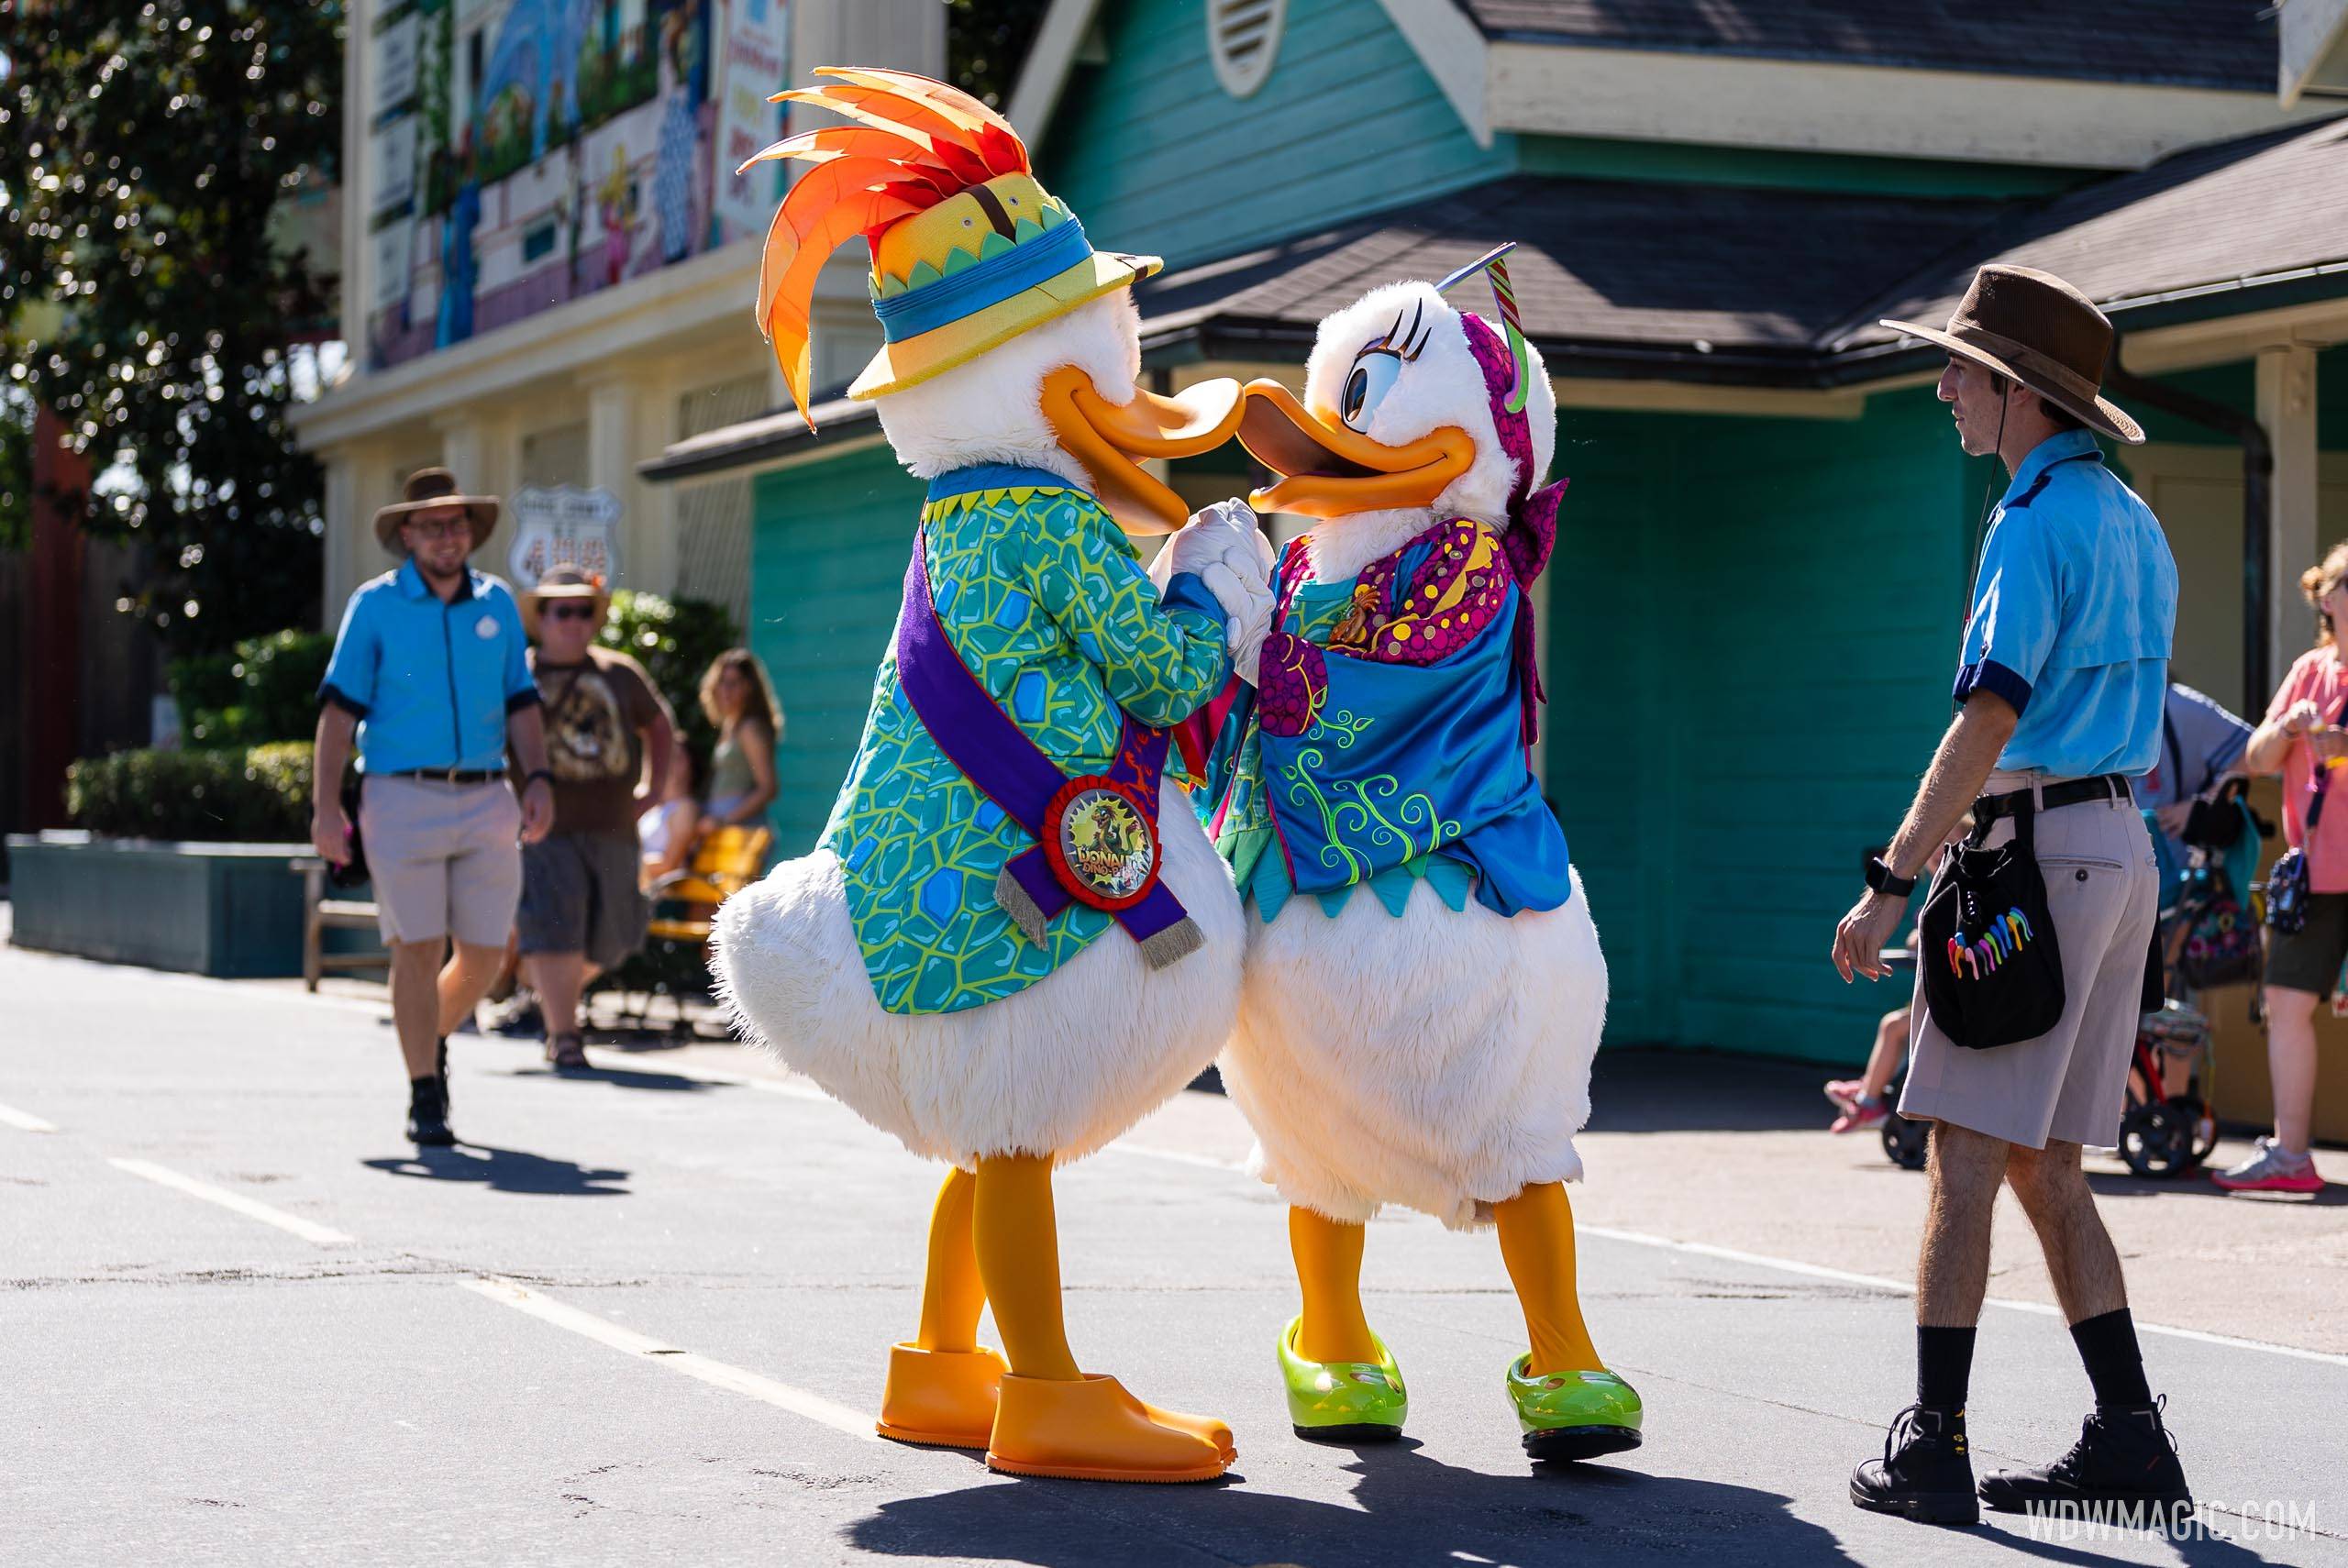 Donald Duck and Daisy Duck at Donald's Dino Bash